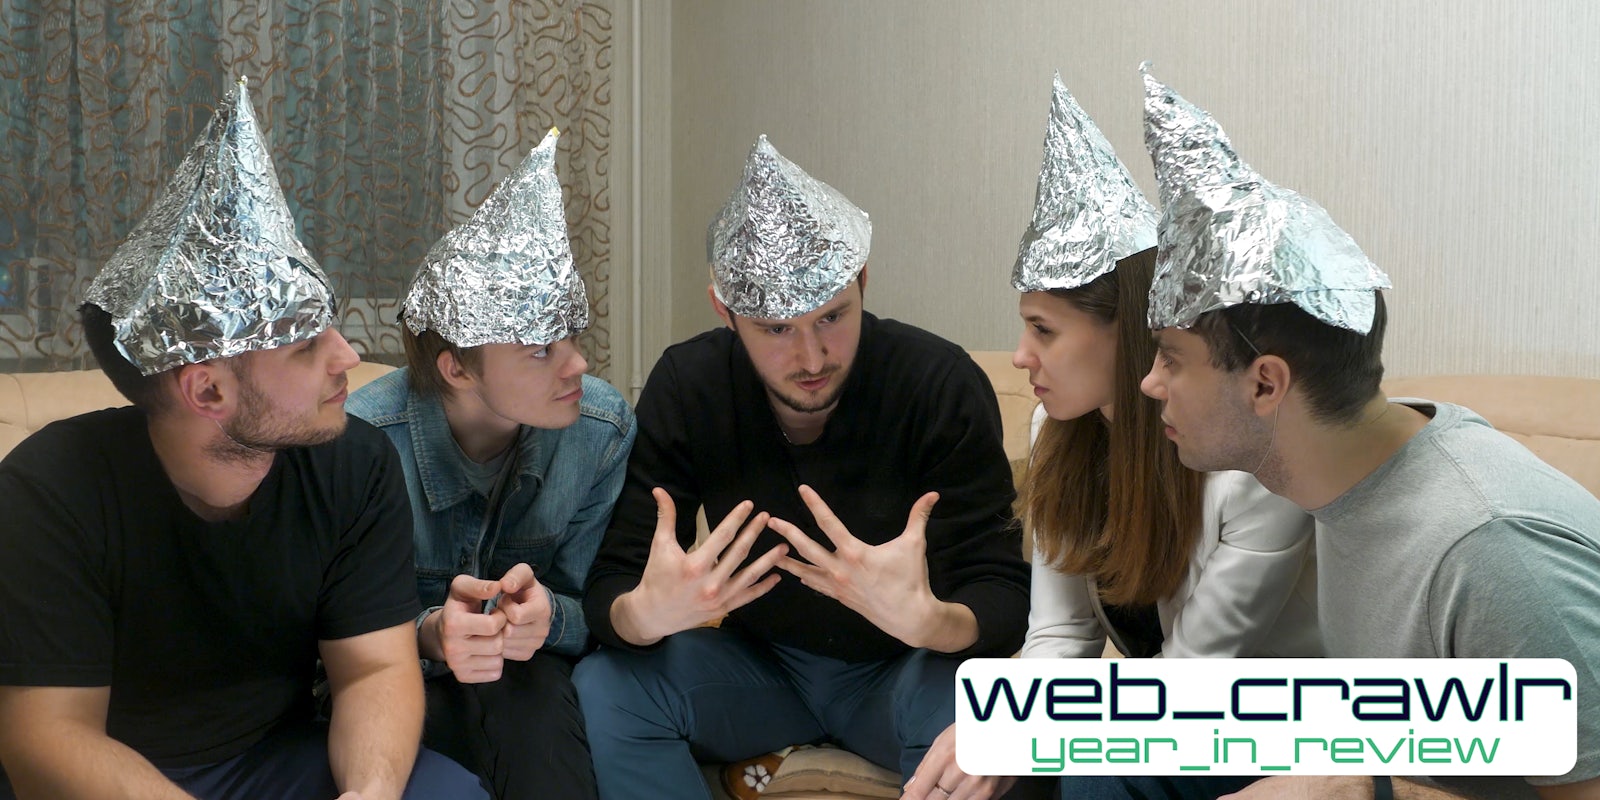 People in tinfoil hats. The Daily Dot web_crawlr logo is in the bottom right corner.